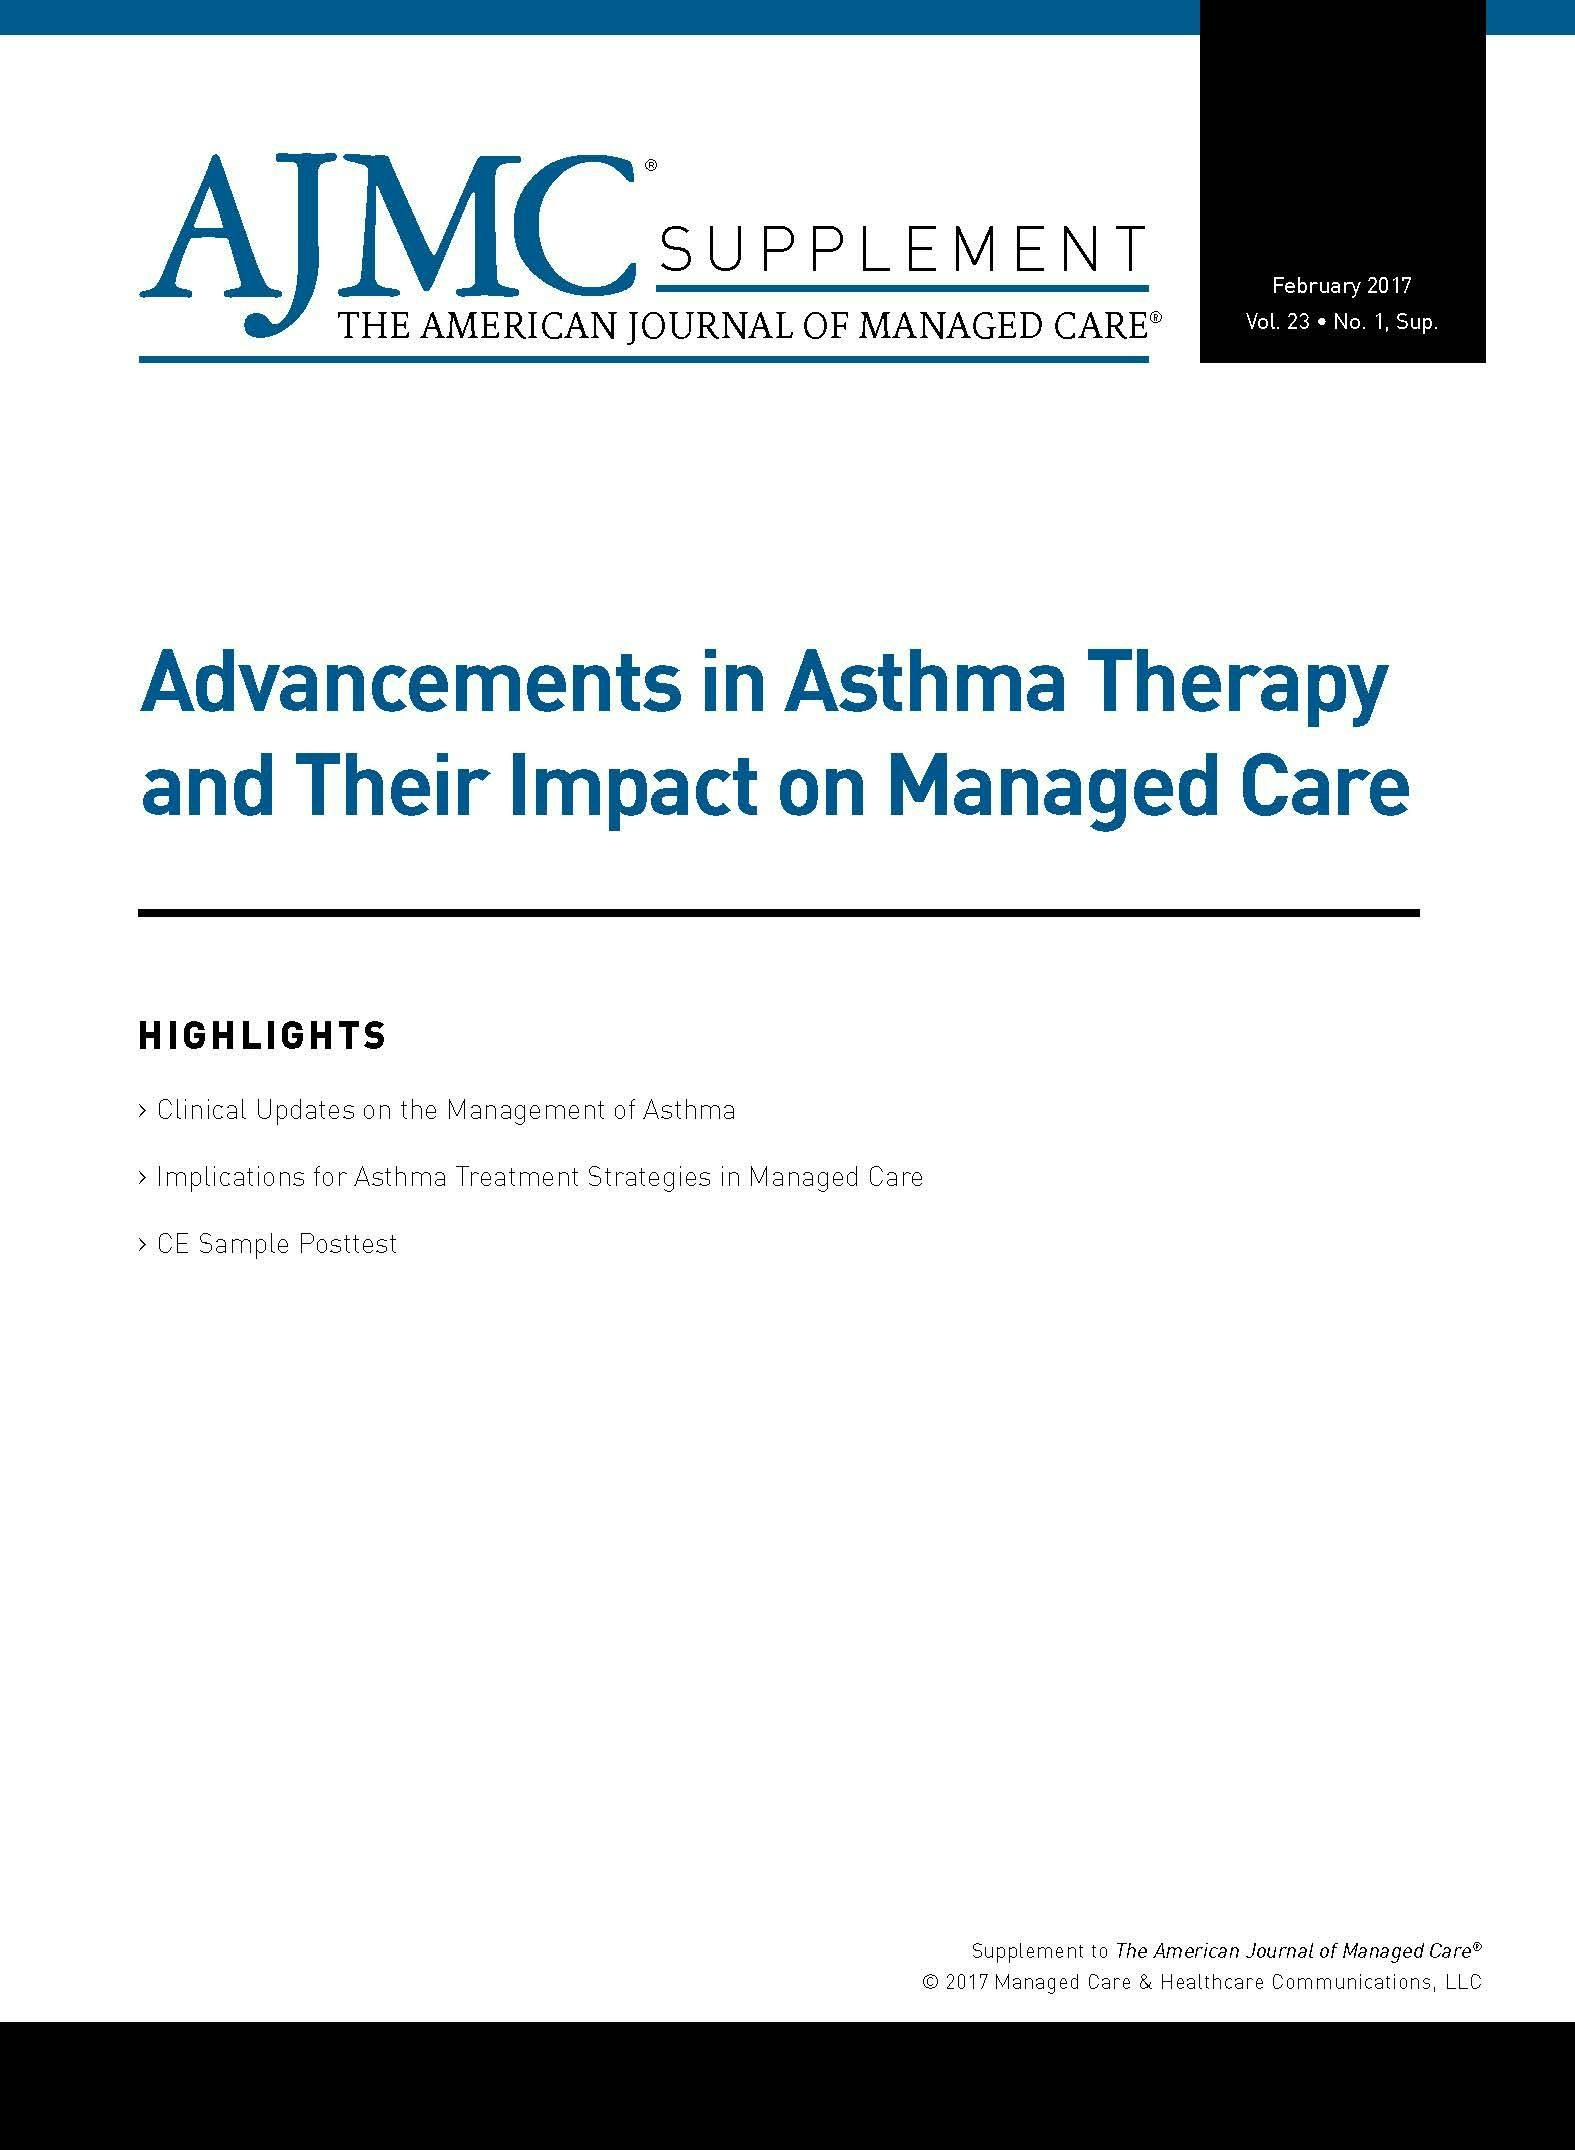 Advancements in Asthma Therapy and Their Impact on Managed Care